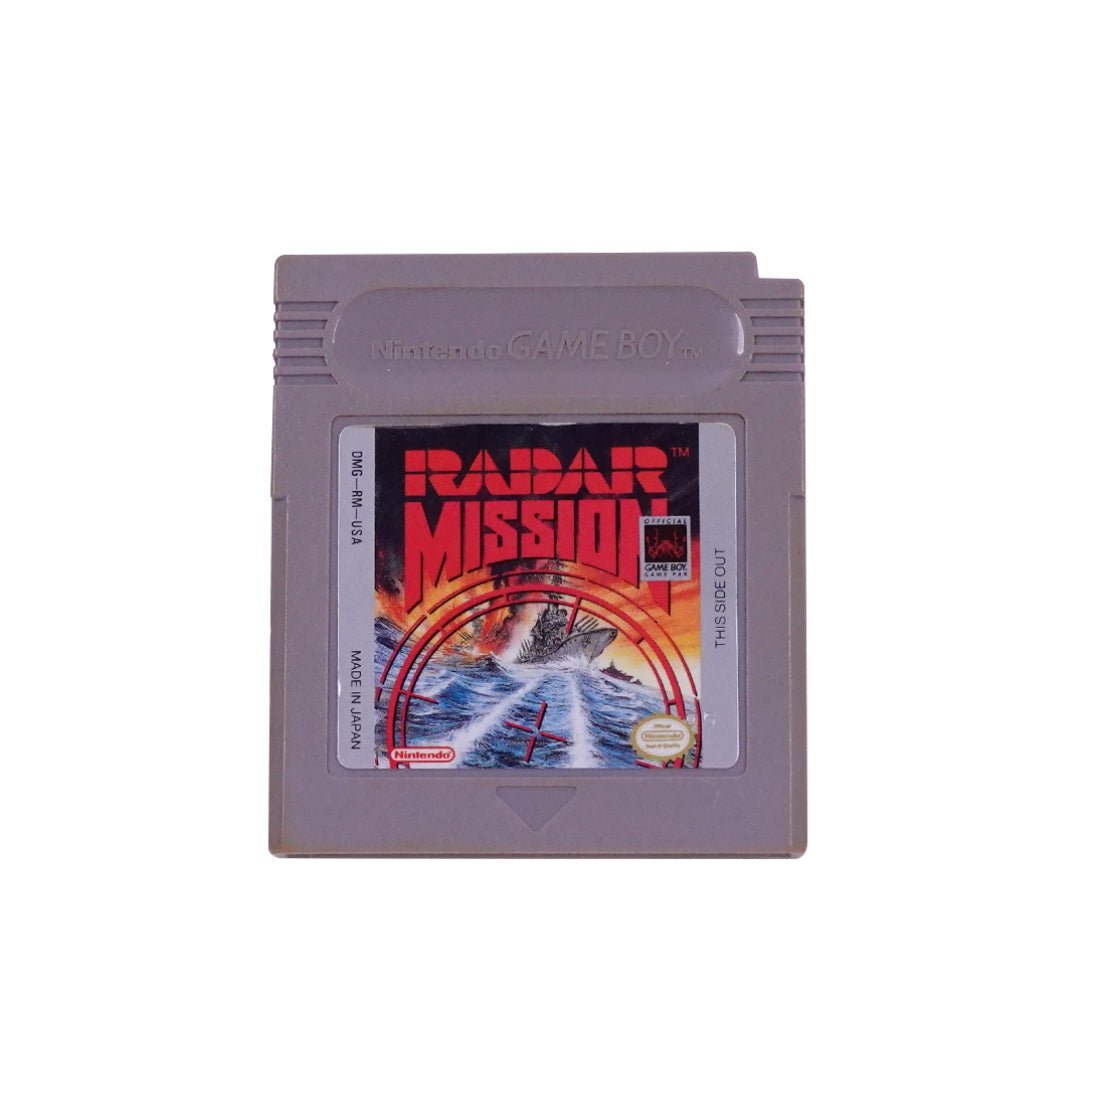 (Pre-Owned) Radar Mission - Gameboy Classic - Store 974 | ستور ٩٧٤